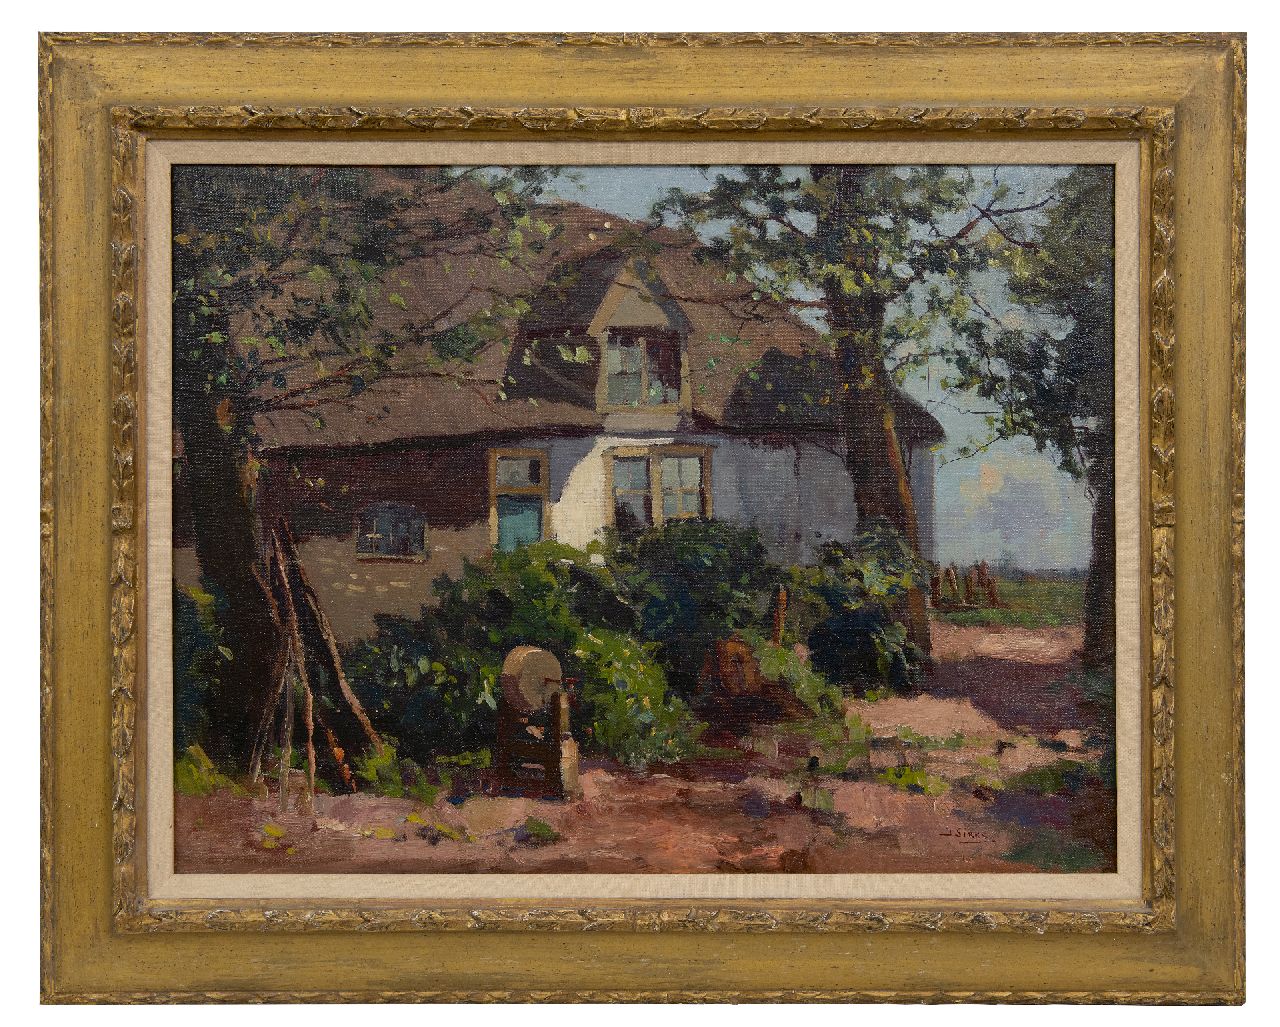 Sirks J.  | Jan Sirks | Paintings offered for sale | Farmyard, oil on canvas 46.2 x 61.5 cm, signed l.r.